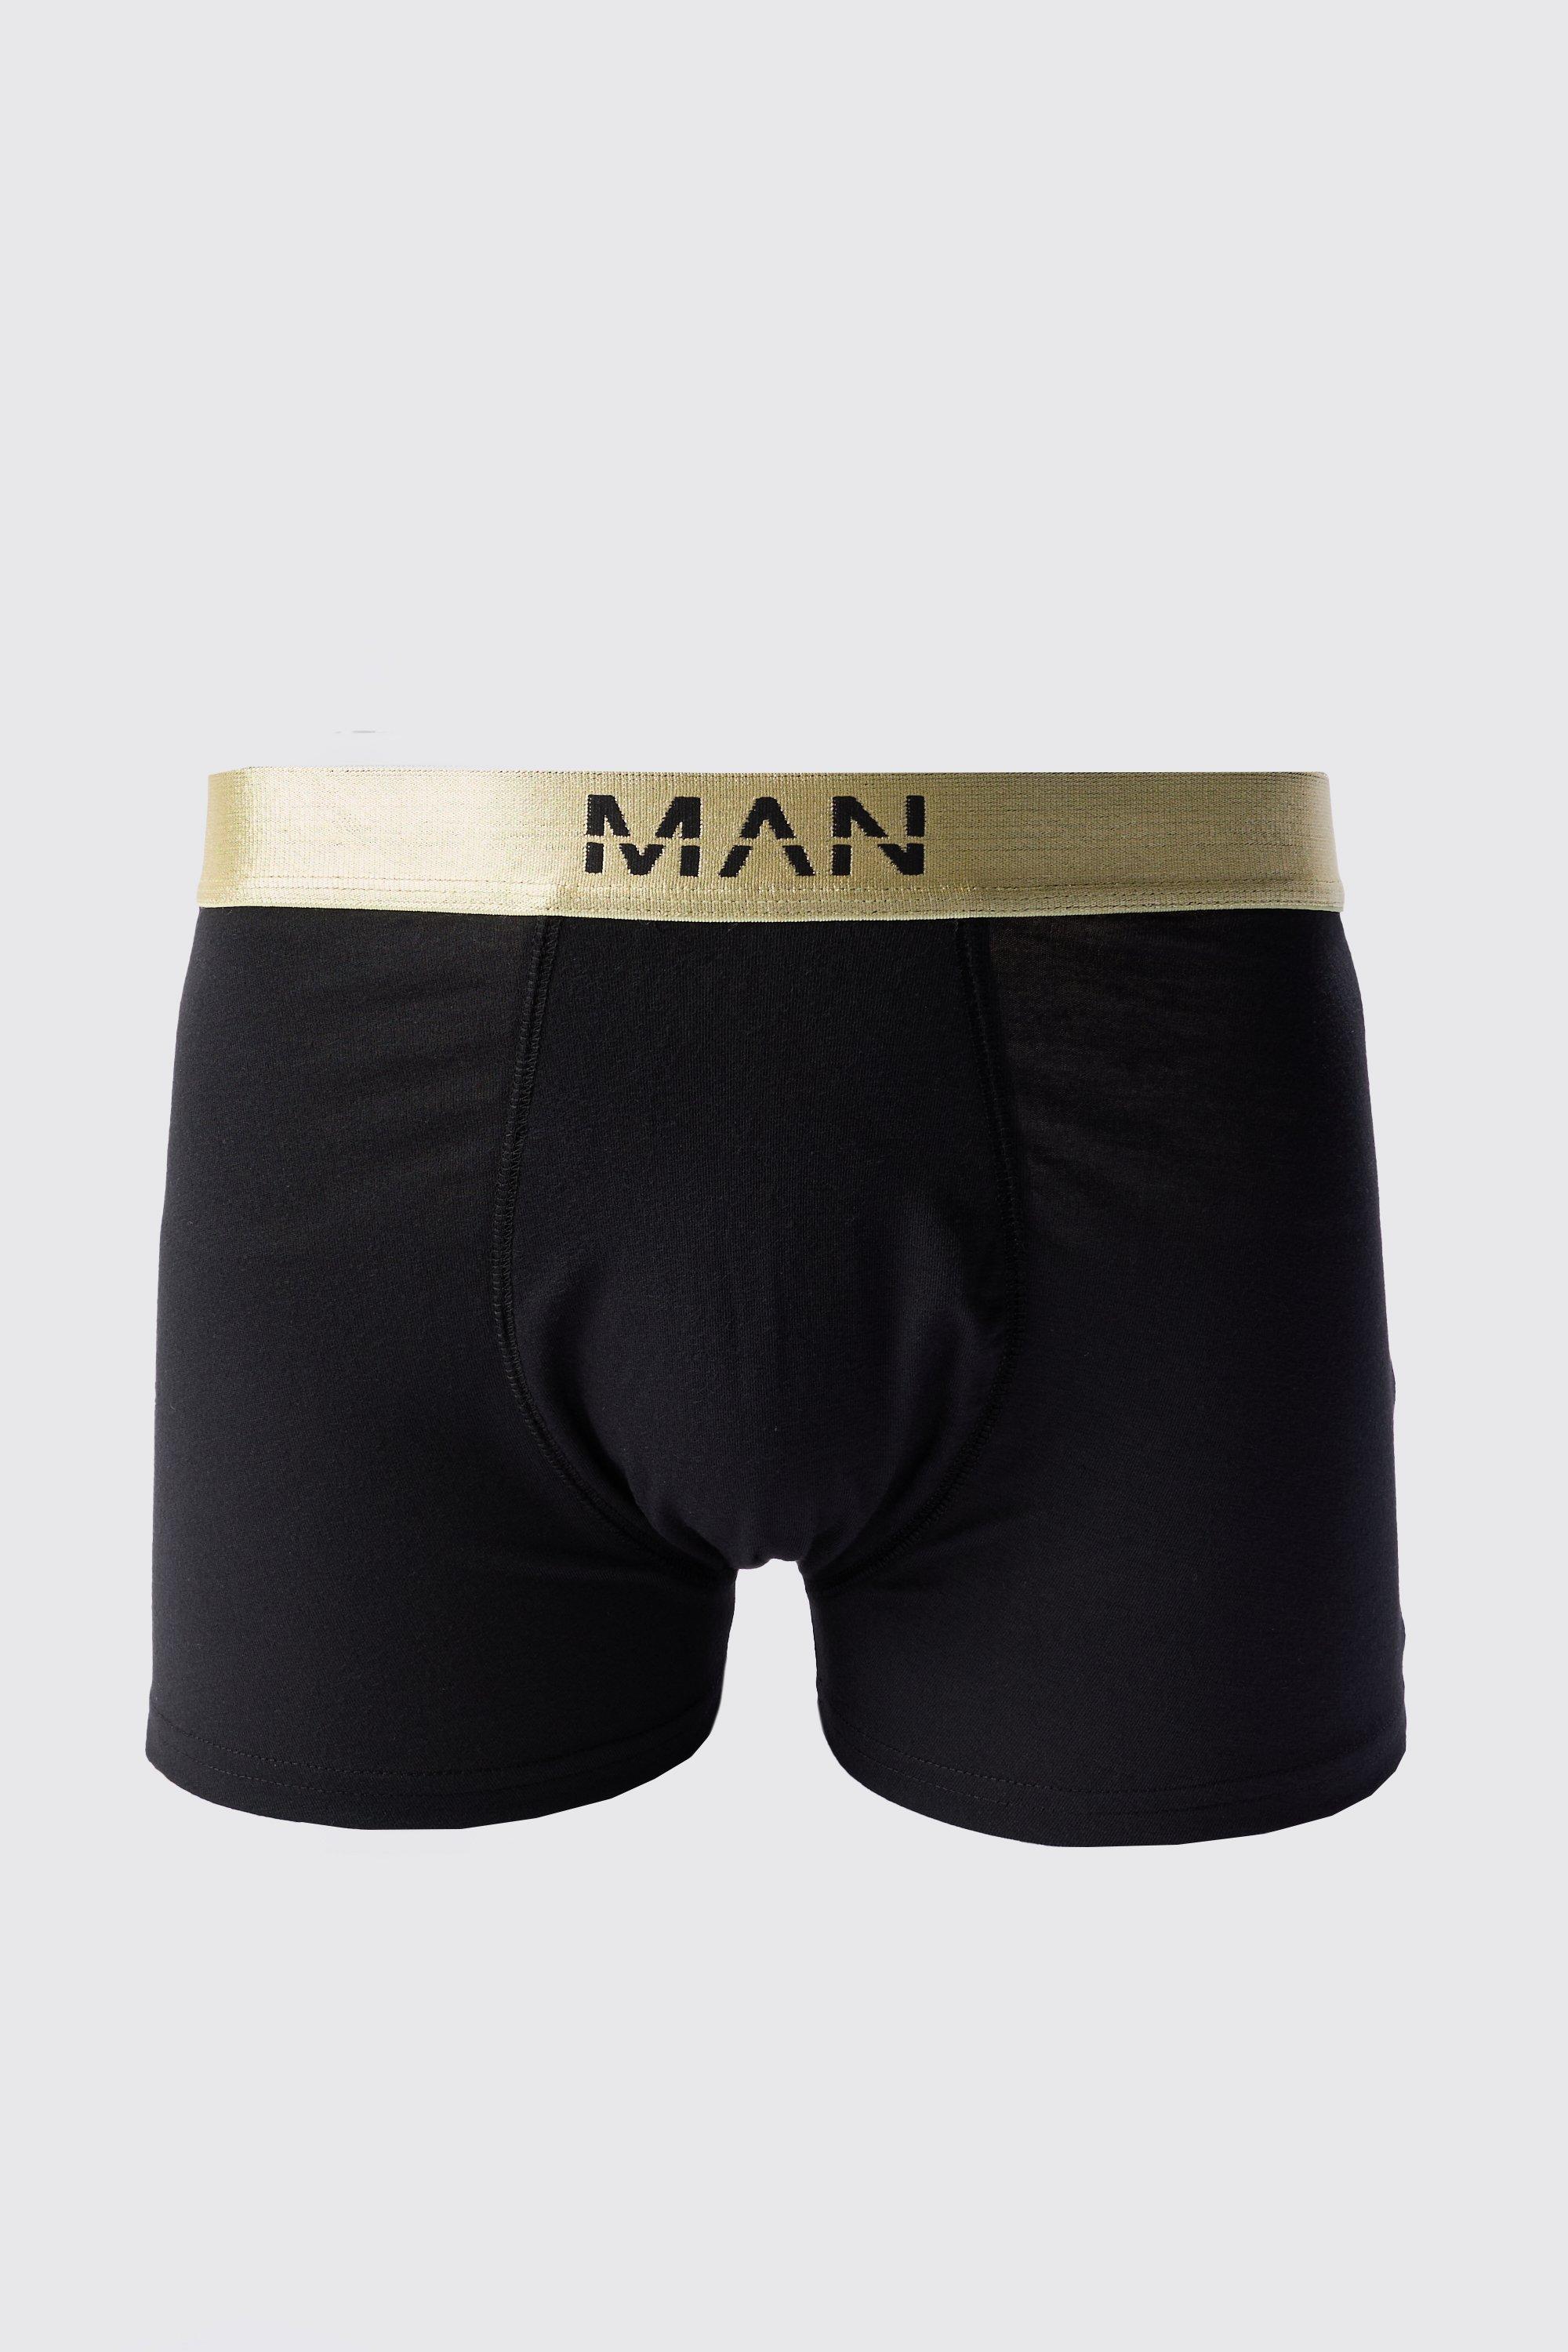 Image of Man Dash Gold Waistband Boxers In Black, Nero